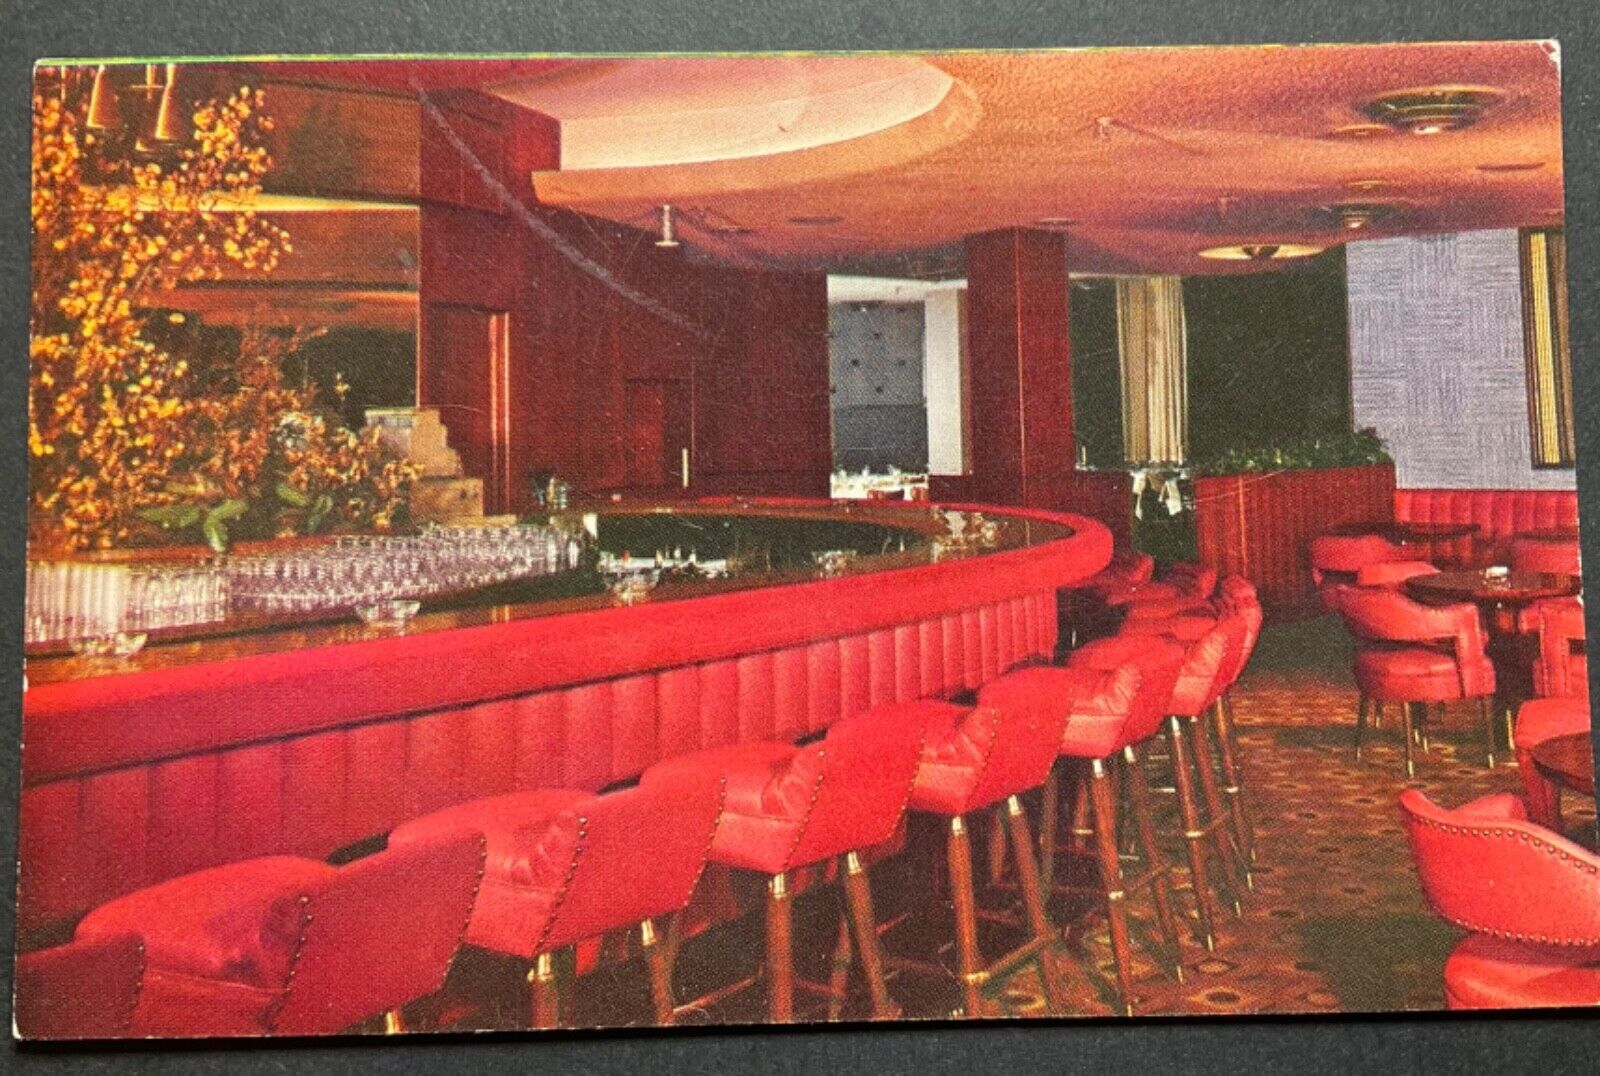 Denver Colorado CO Postcard The matchless restaurant and lounge